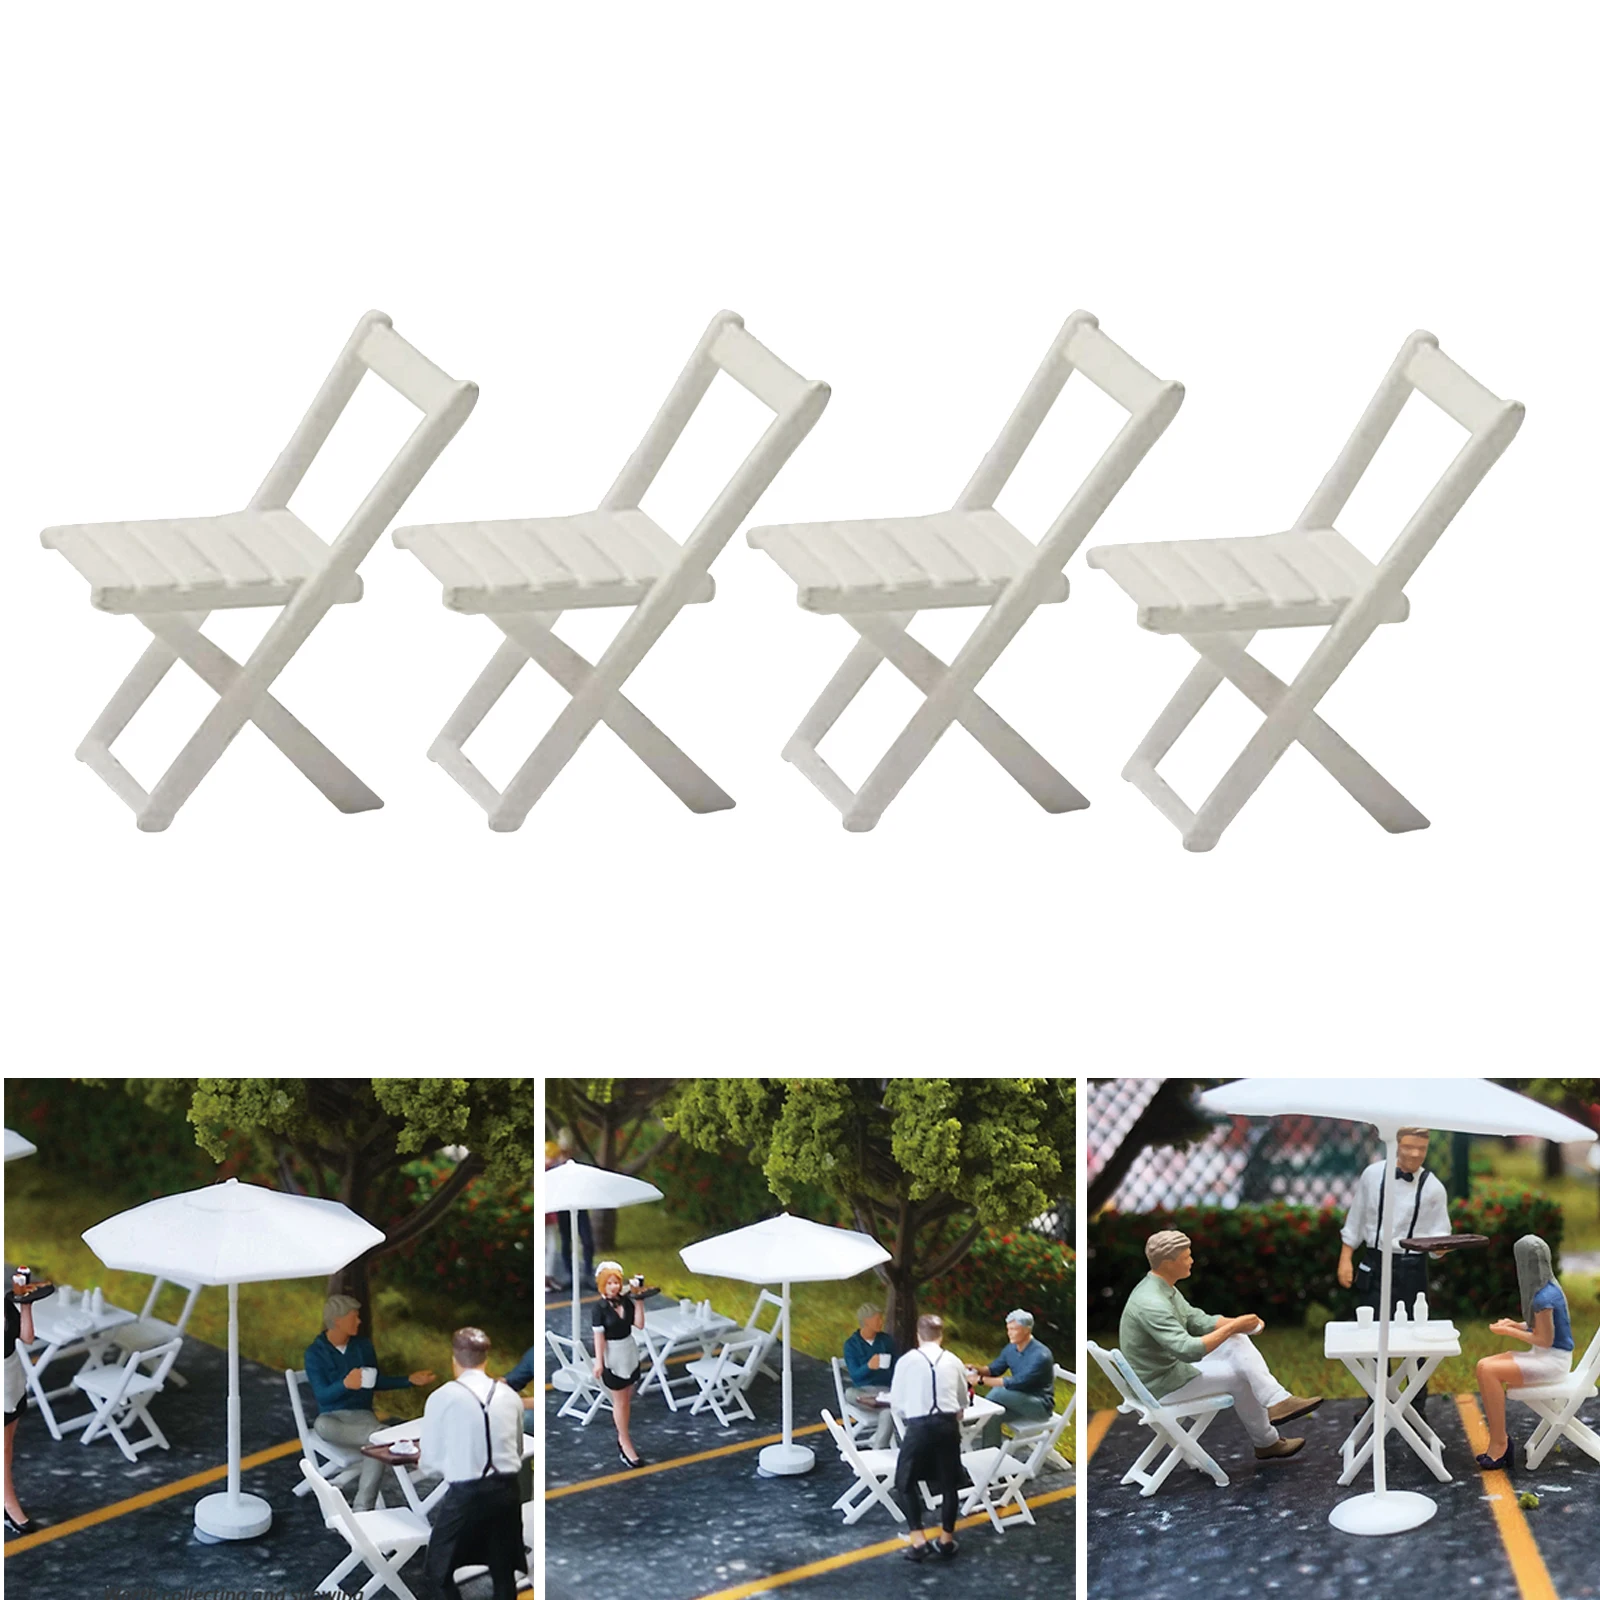 4pcs 1:64th Figures Model Resin Chair for Miniature Scenes, Diorama Decoration Accessories